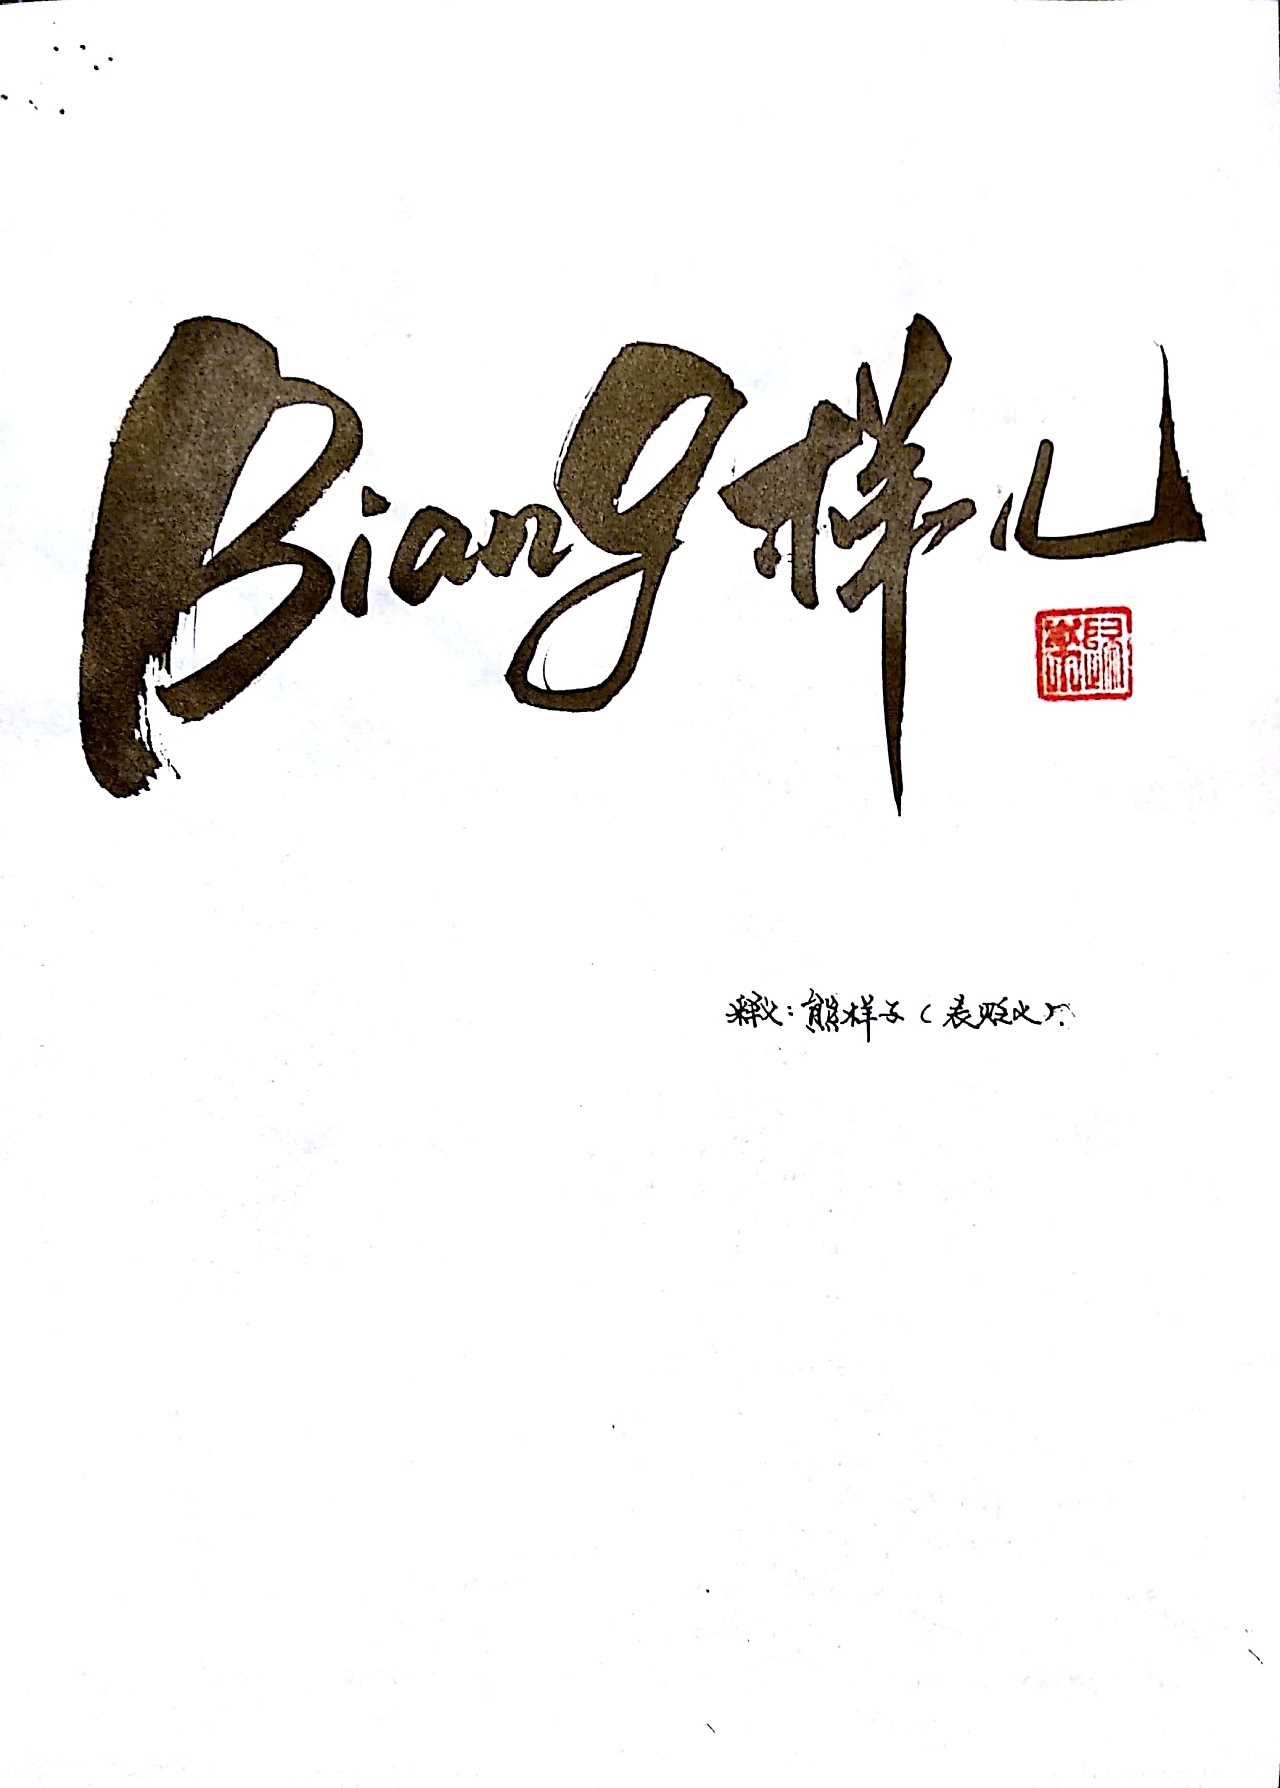 17P Chinese traditional calligraphy brush calligraphy font style appreciation #197